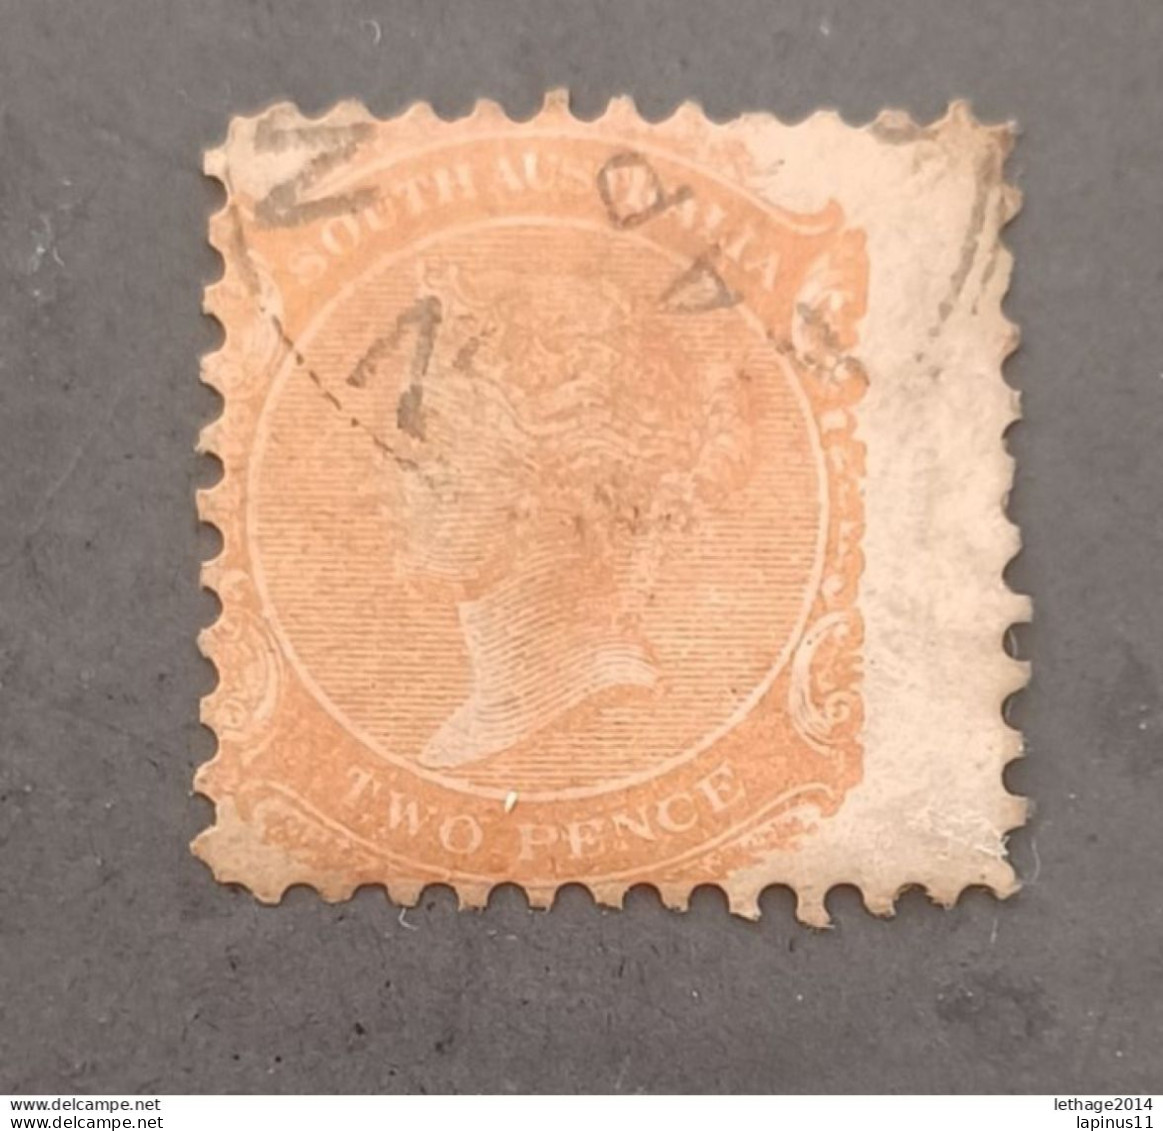 SOUTH AUSTRALIA 1868 QUEEN VICTORIA CAT GIBBONS N 157 PERF 9 VARIETY OF DRILLING, AND MEASUREMENT ERROR - Oblitérés